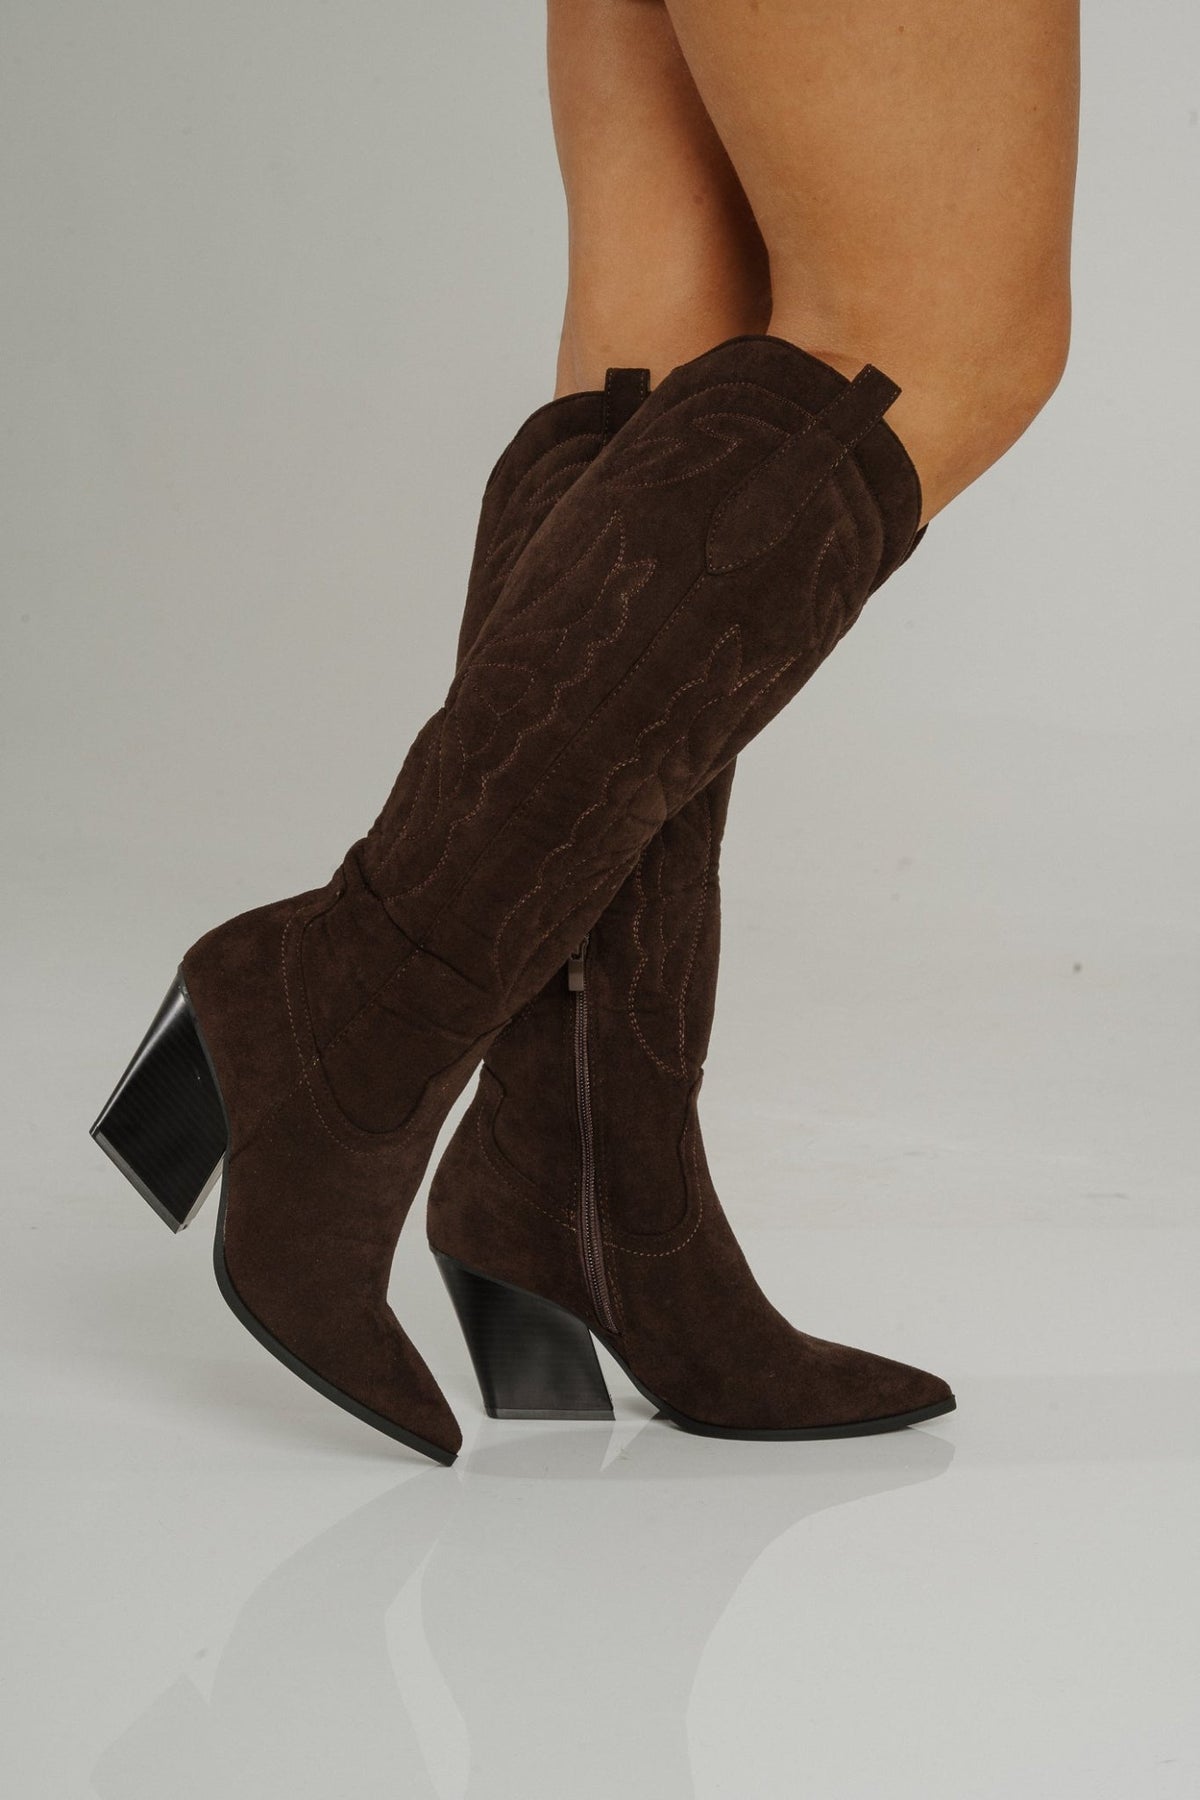 Izzy Quilted Western Boot In Chocolate - The Walk in Wardrobe